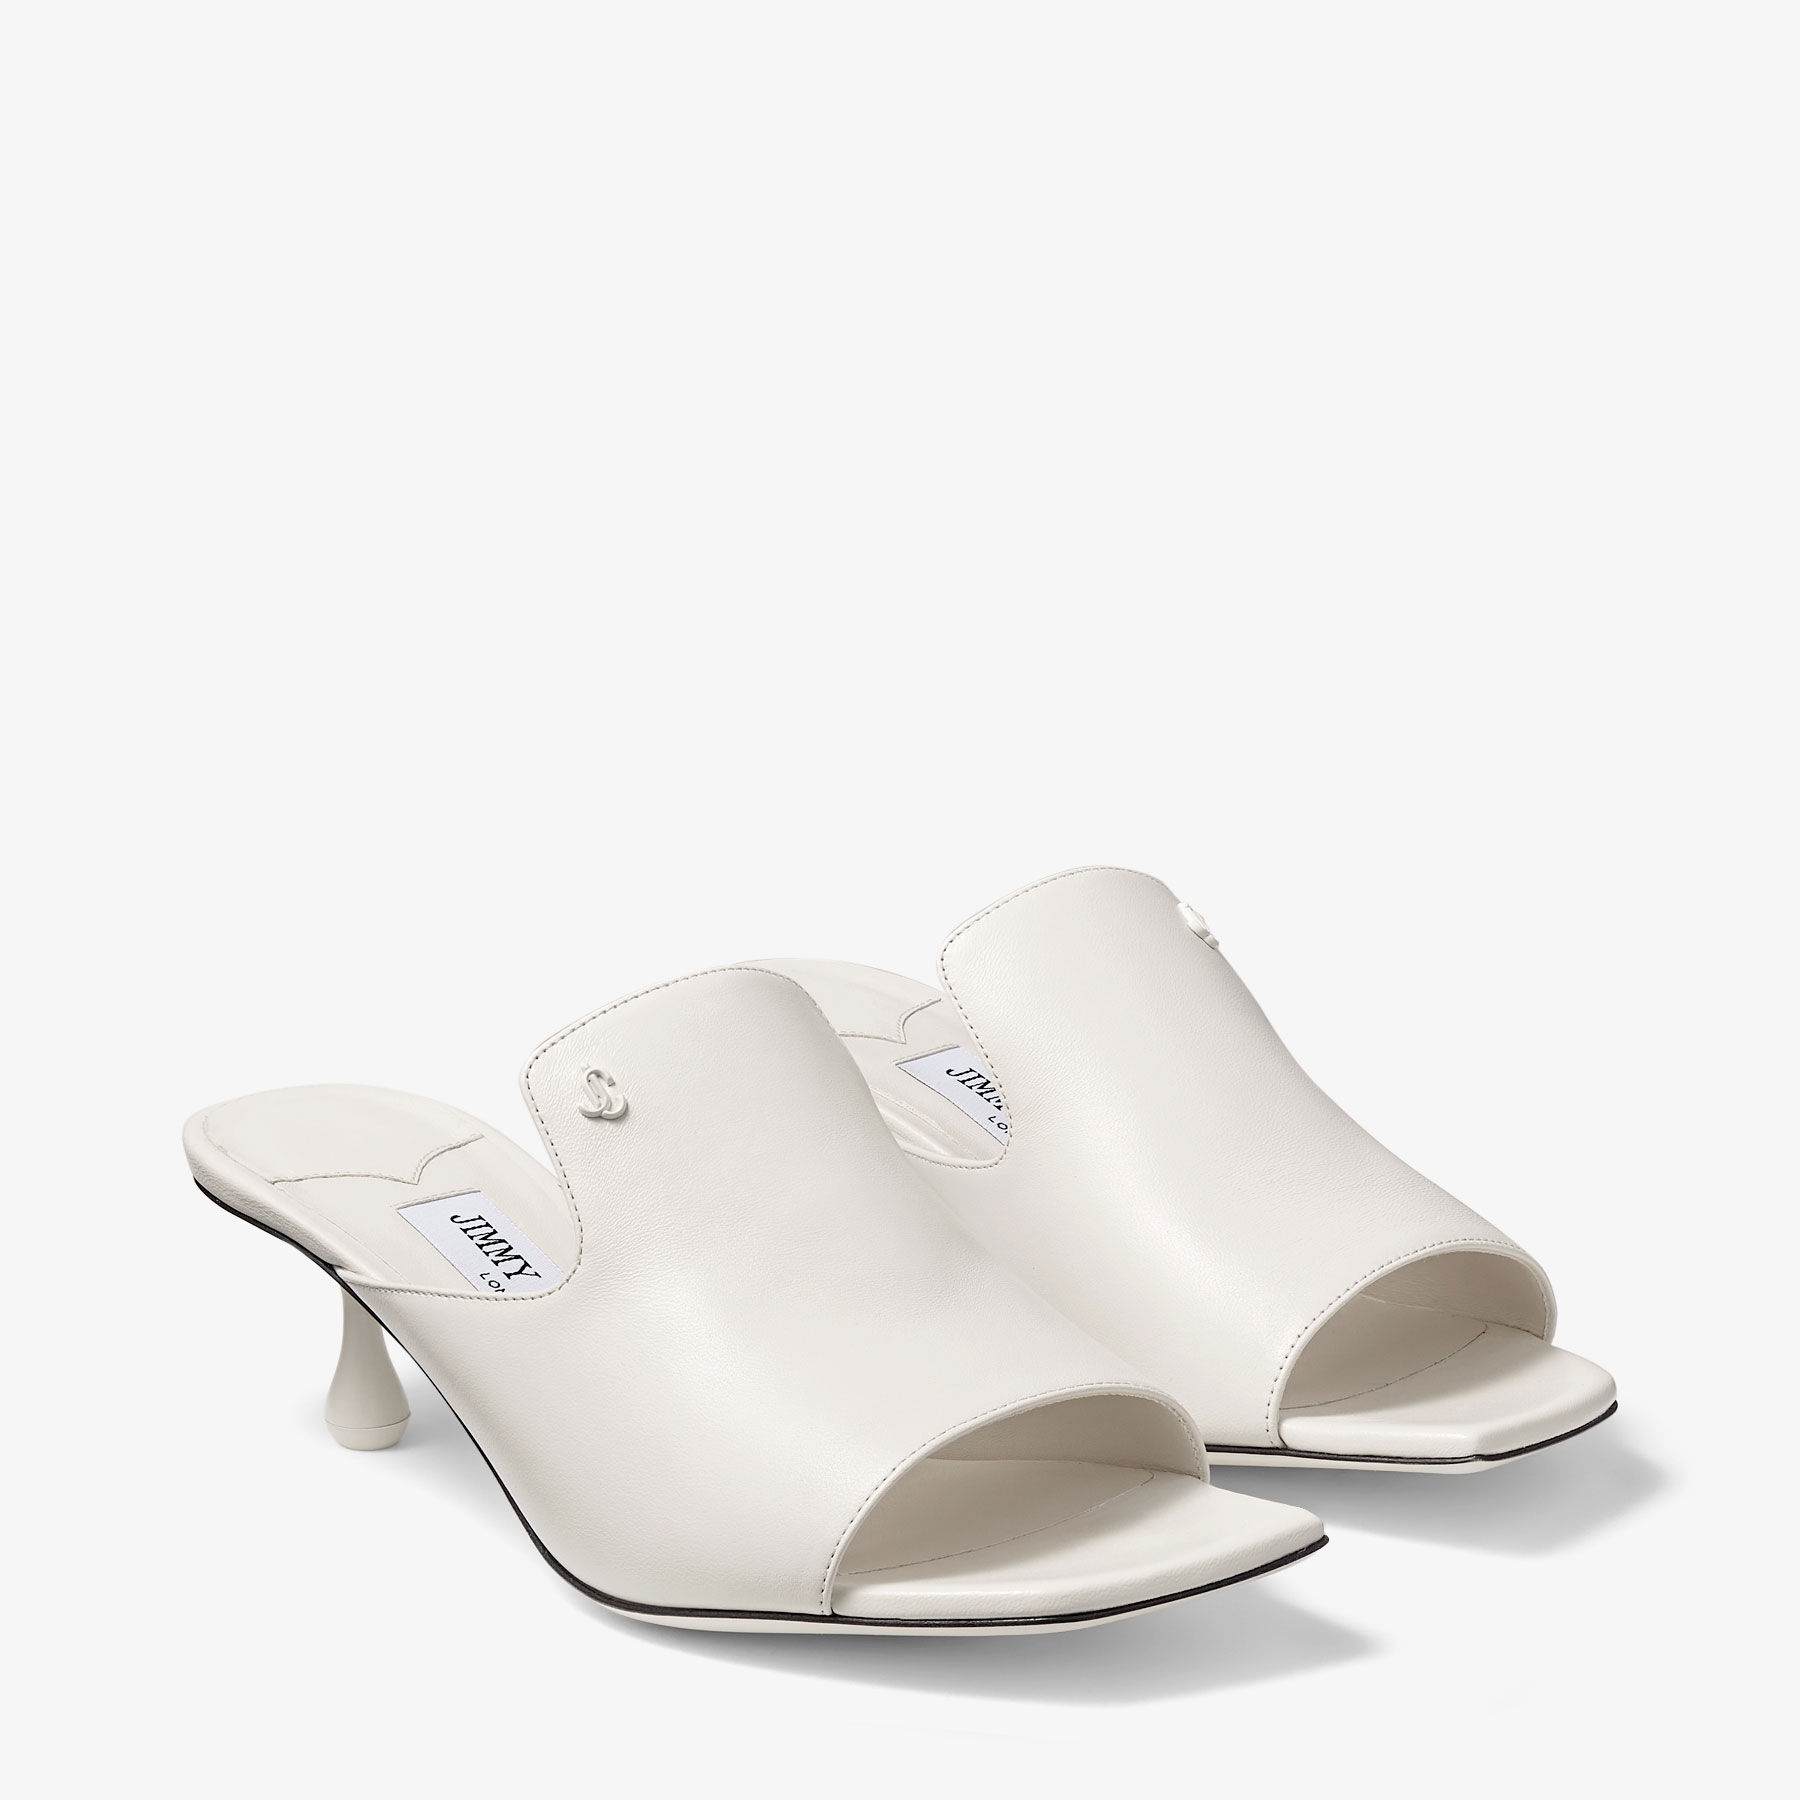 Ander 50
Latte Nappa Leather Sandals - 2